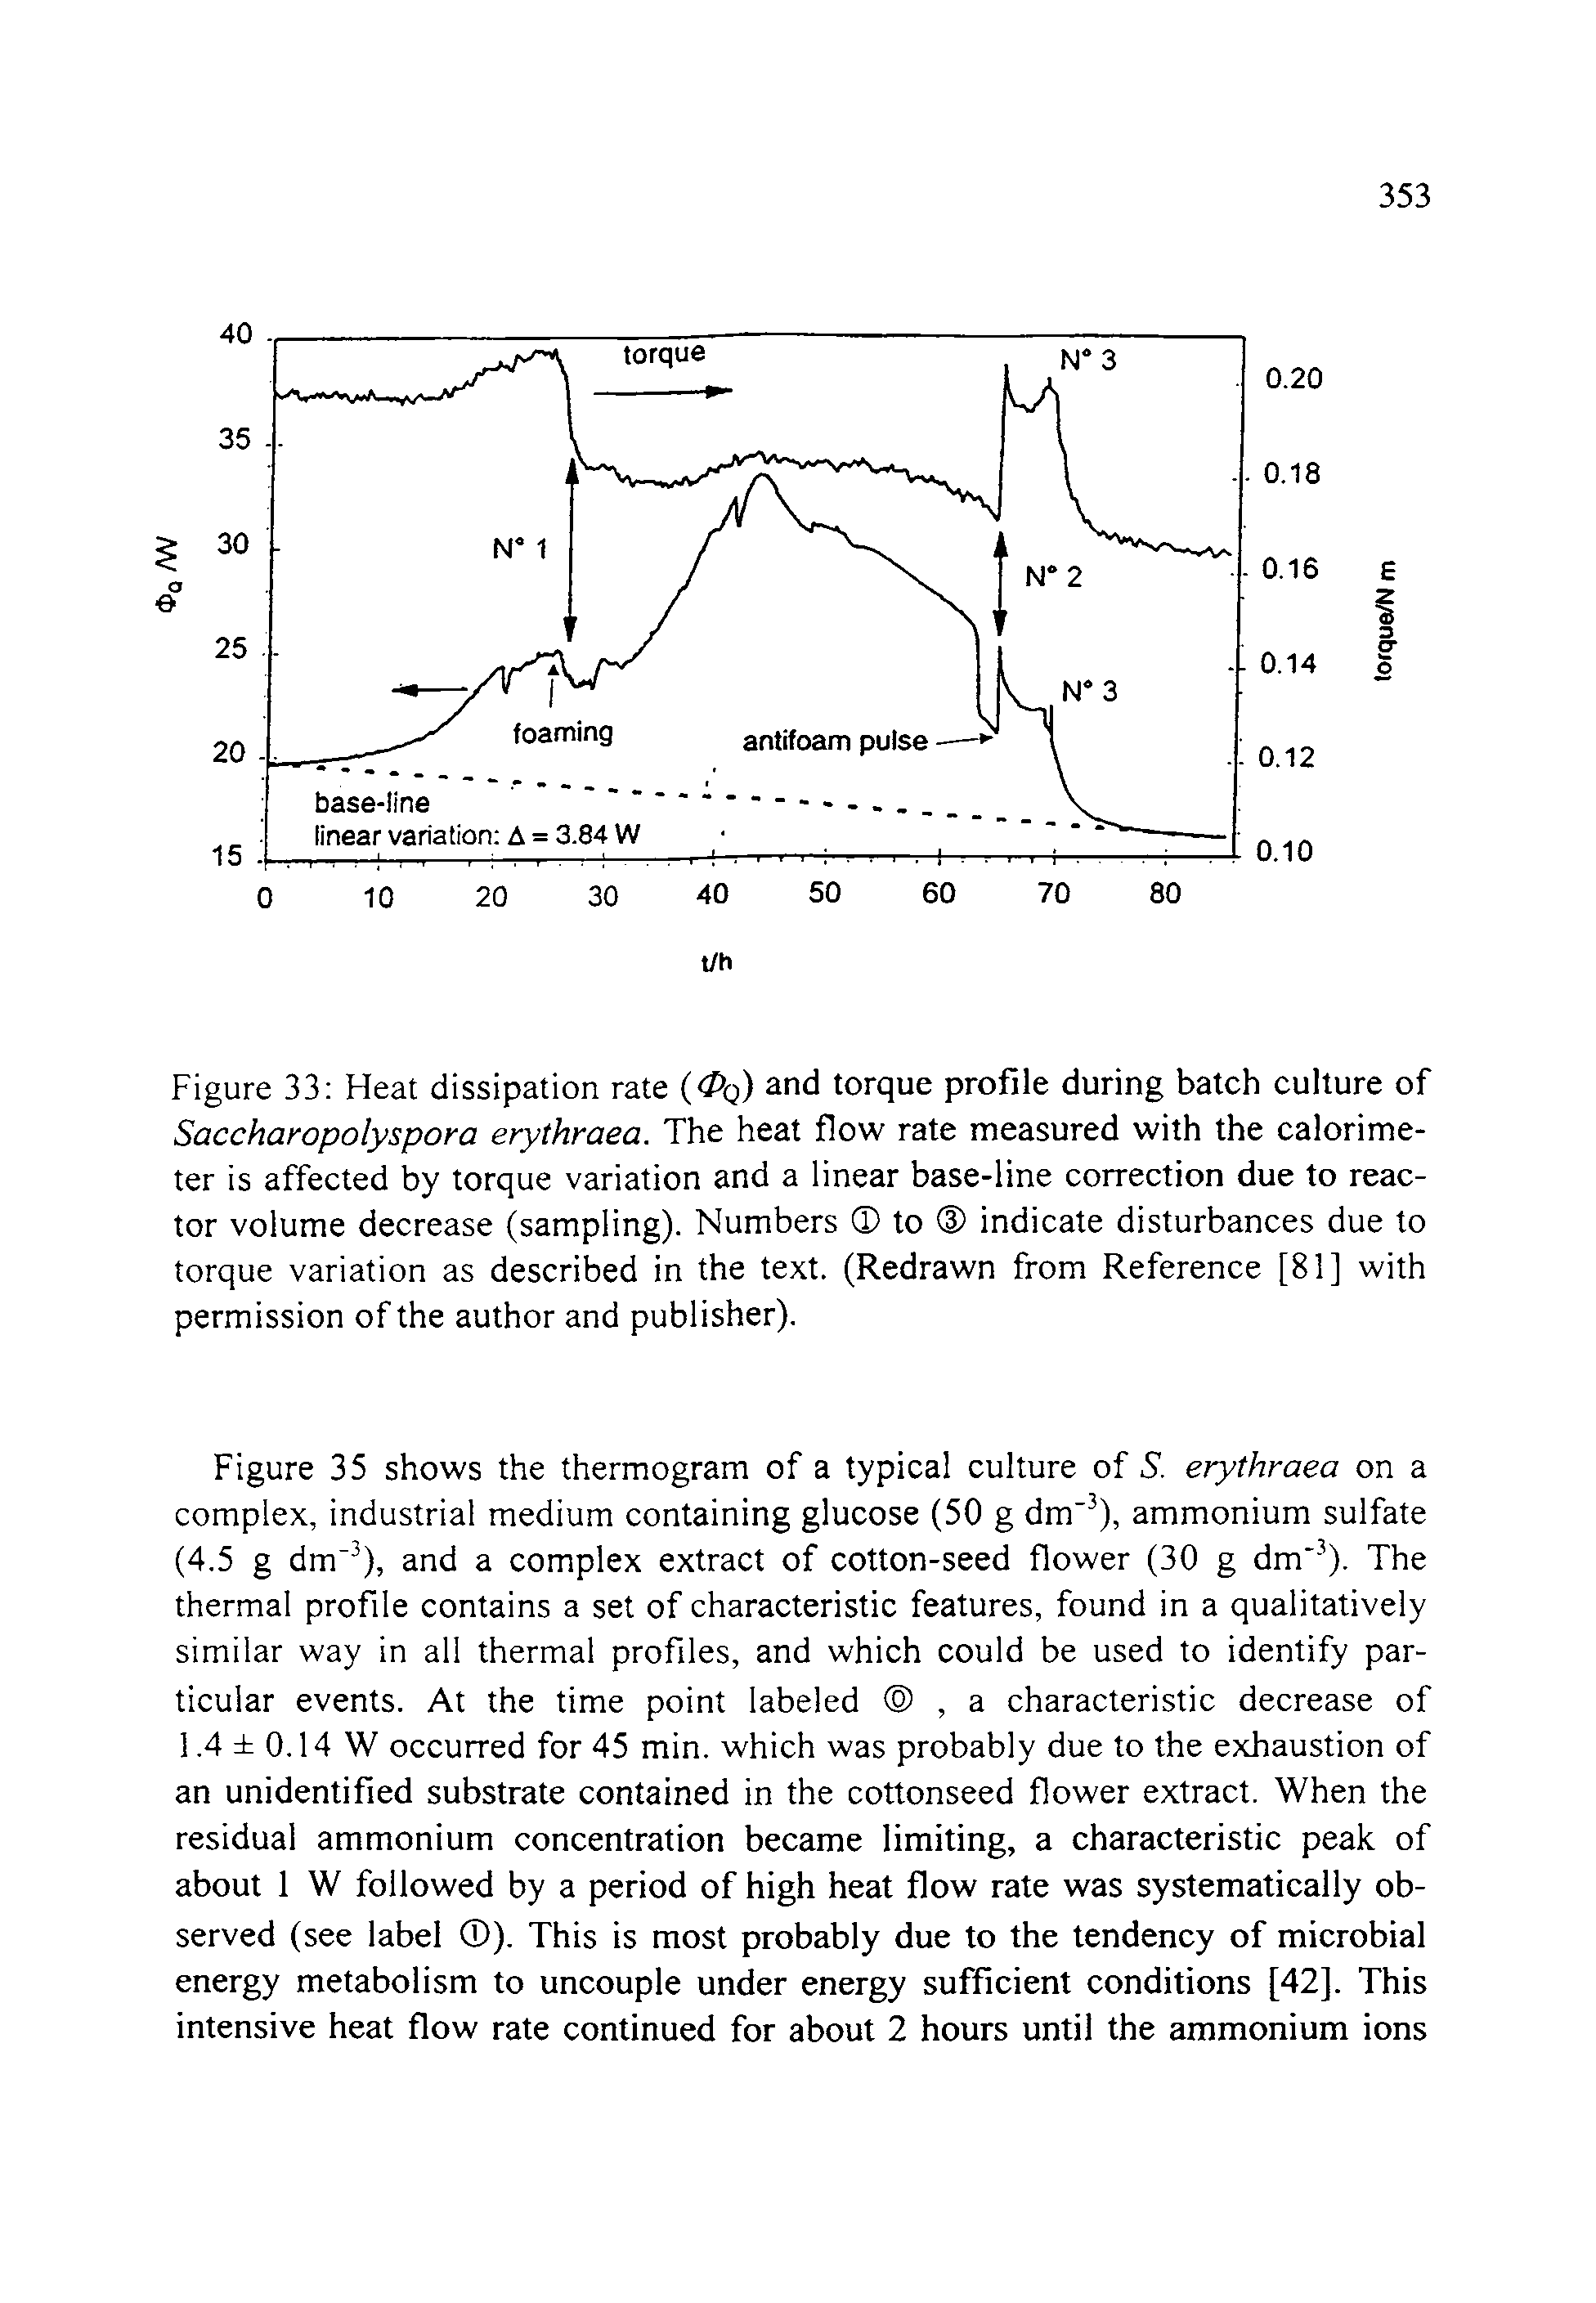 Figure 33 Heat dissipation rate <Pq) and torque profile during batch culture of Saccharopolyspora erythraea. The heat flow rate measured with the calorimeter is affected by torque variation and a linear base-line correction due to reactor volume decrease (sampling). Numbers to indicate disturbances due to torque variation as described in the text. (Redrawn from Reference [81] with permission of the author and publisher).